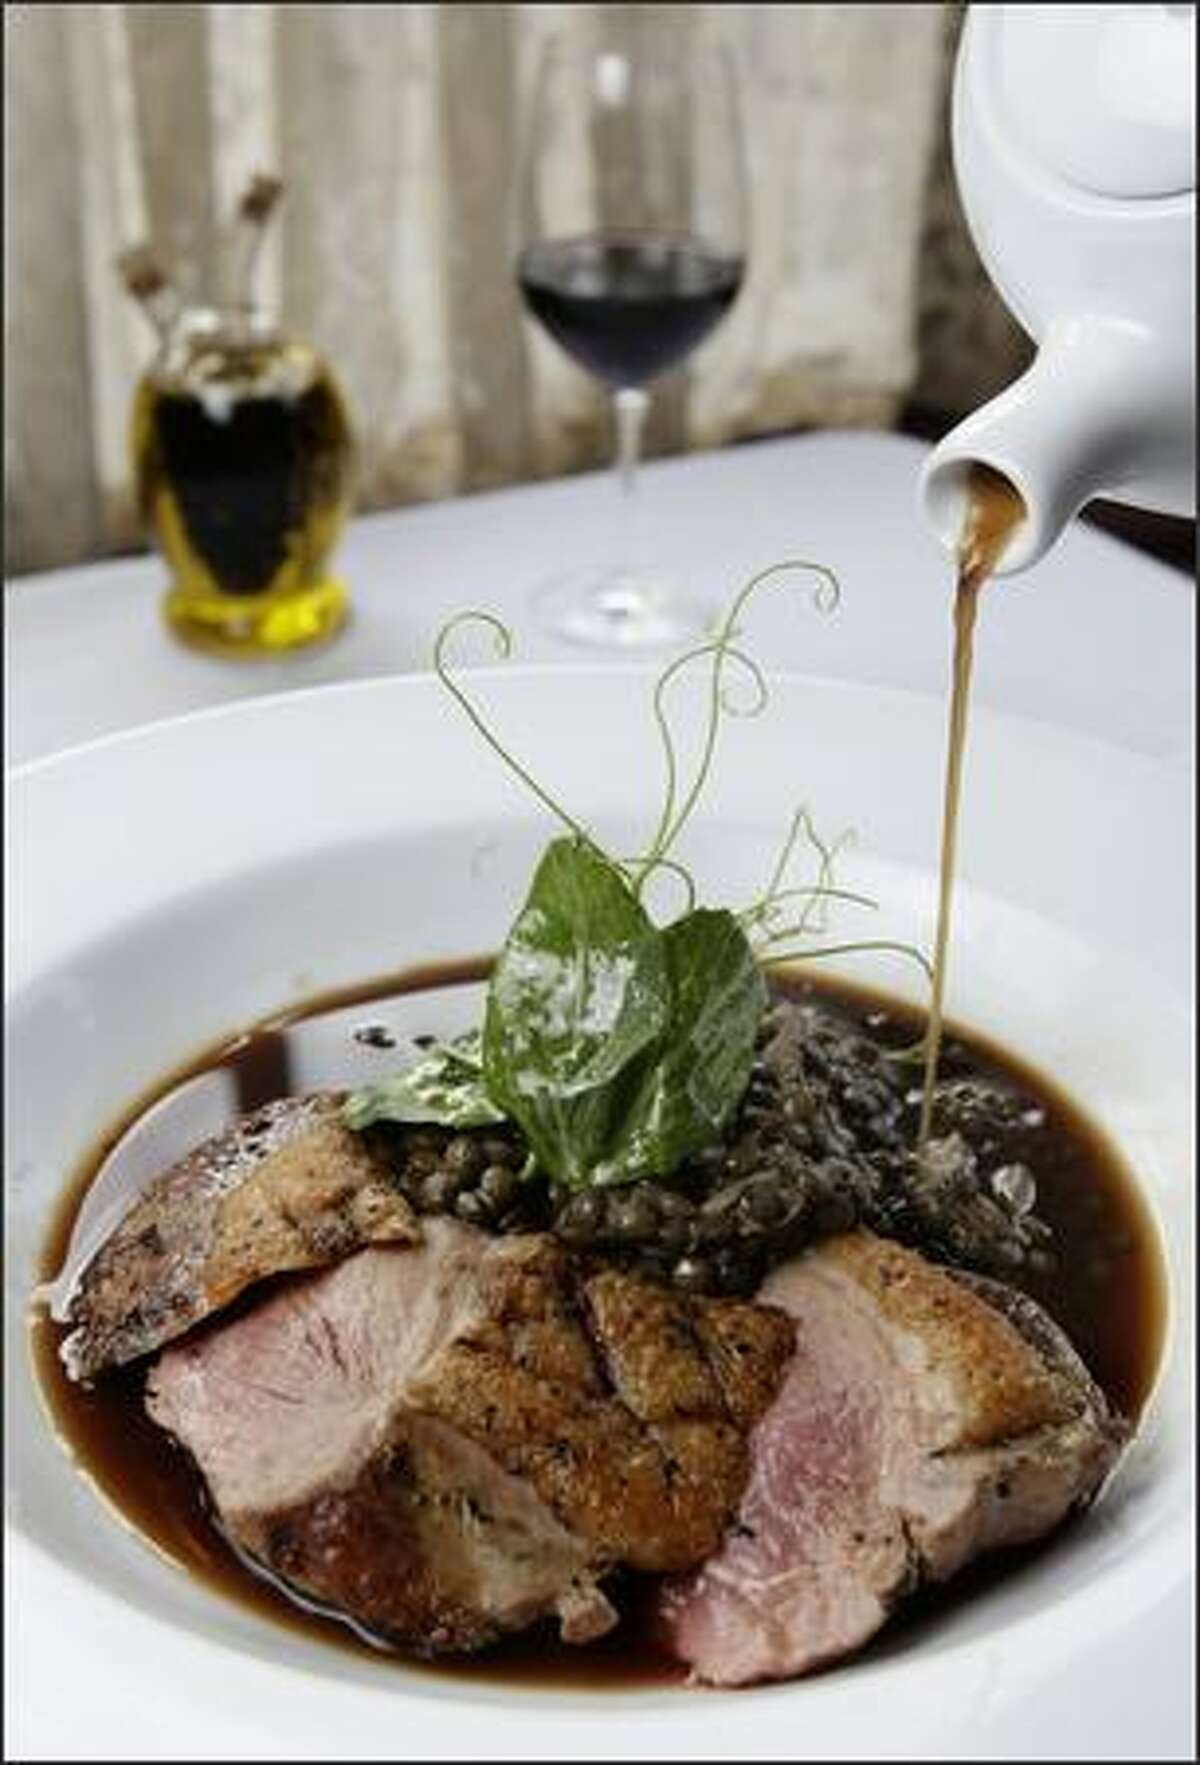 Ripasso duck jus is poured over Anatra Alla Lenticchia, a seared duck breast with lentils, pancetta, duck confit and pea vines. La Dolce Vita's menu is worthy of special occasions, arranged traditionally into starters, pasta and entrees.